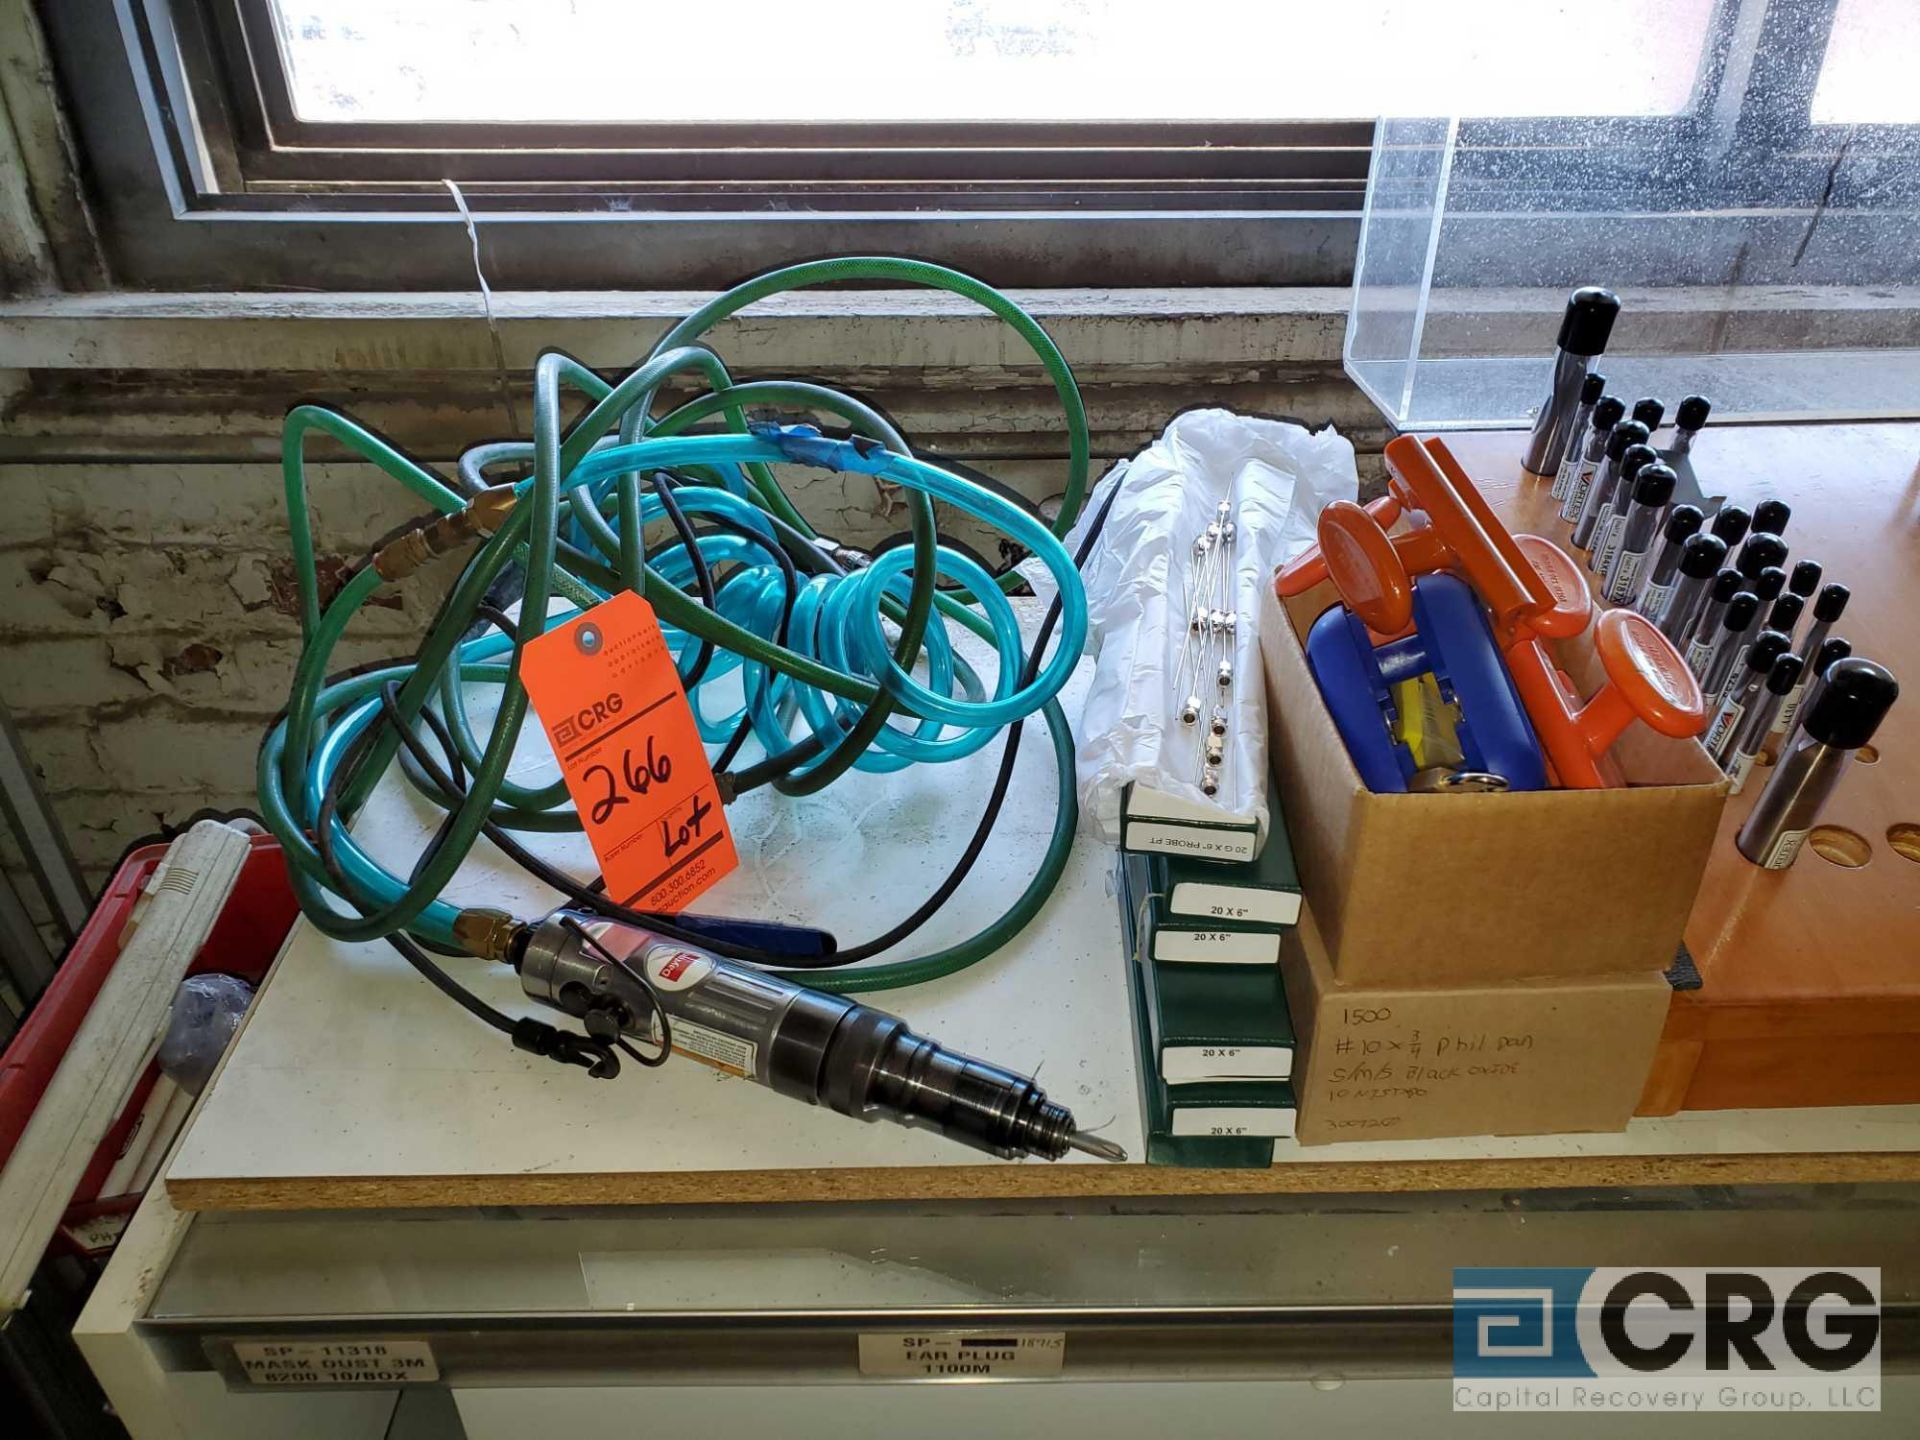 Lot consists of assorted carbide tooling, lock out/tag out safety equipment, pex tubing 3/4 in. x 25 - Image 3 of 11